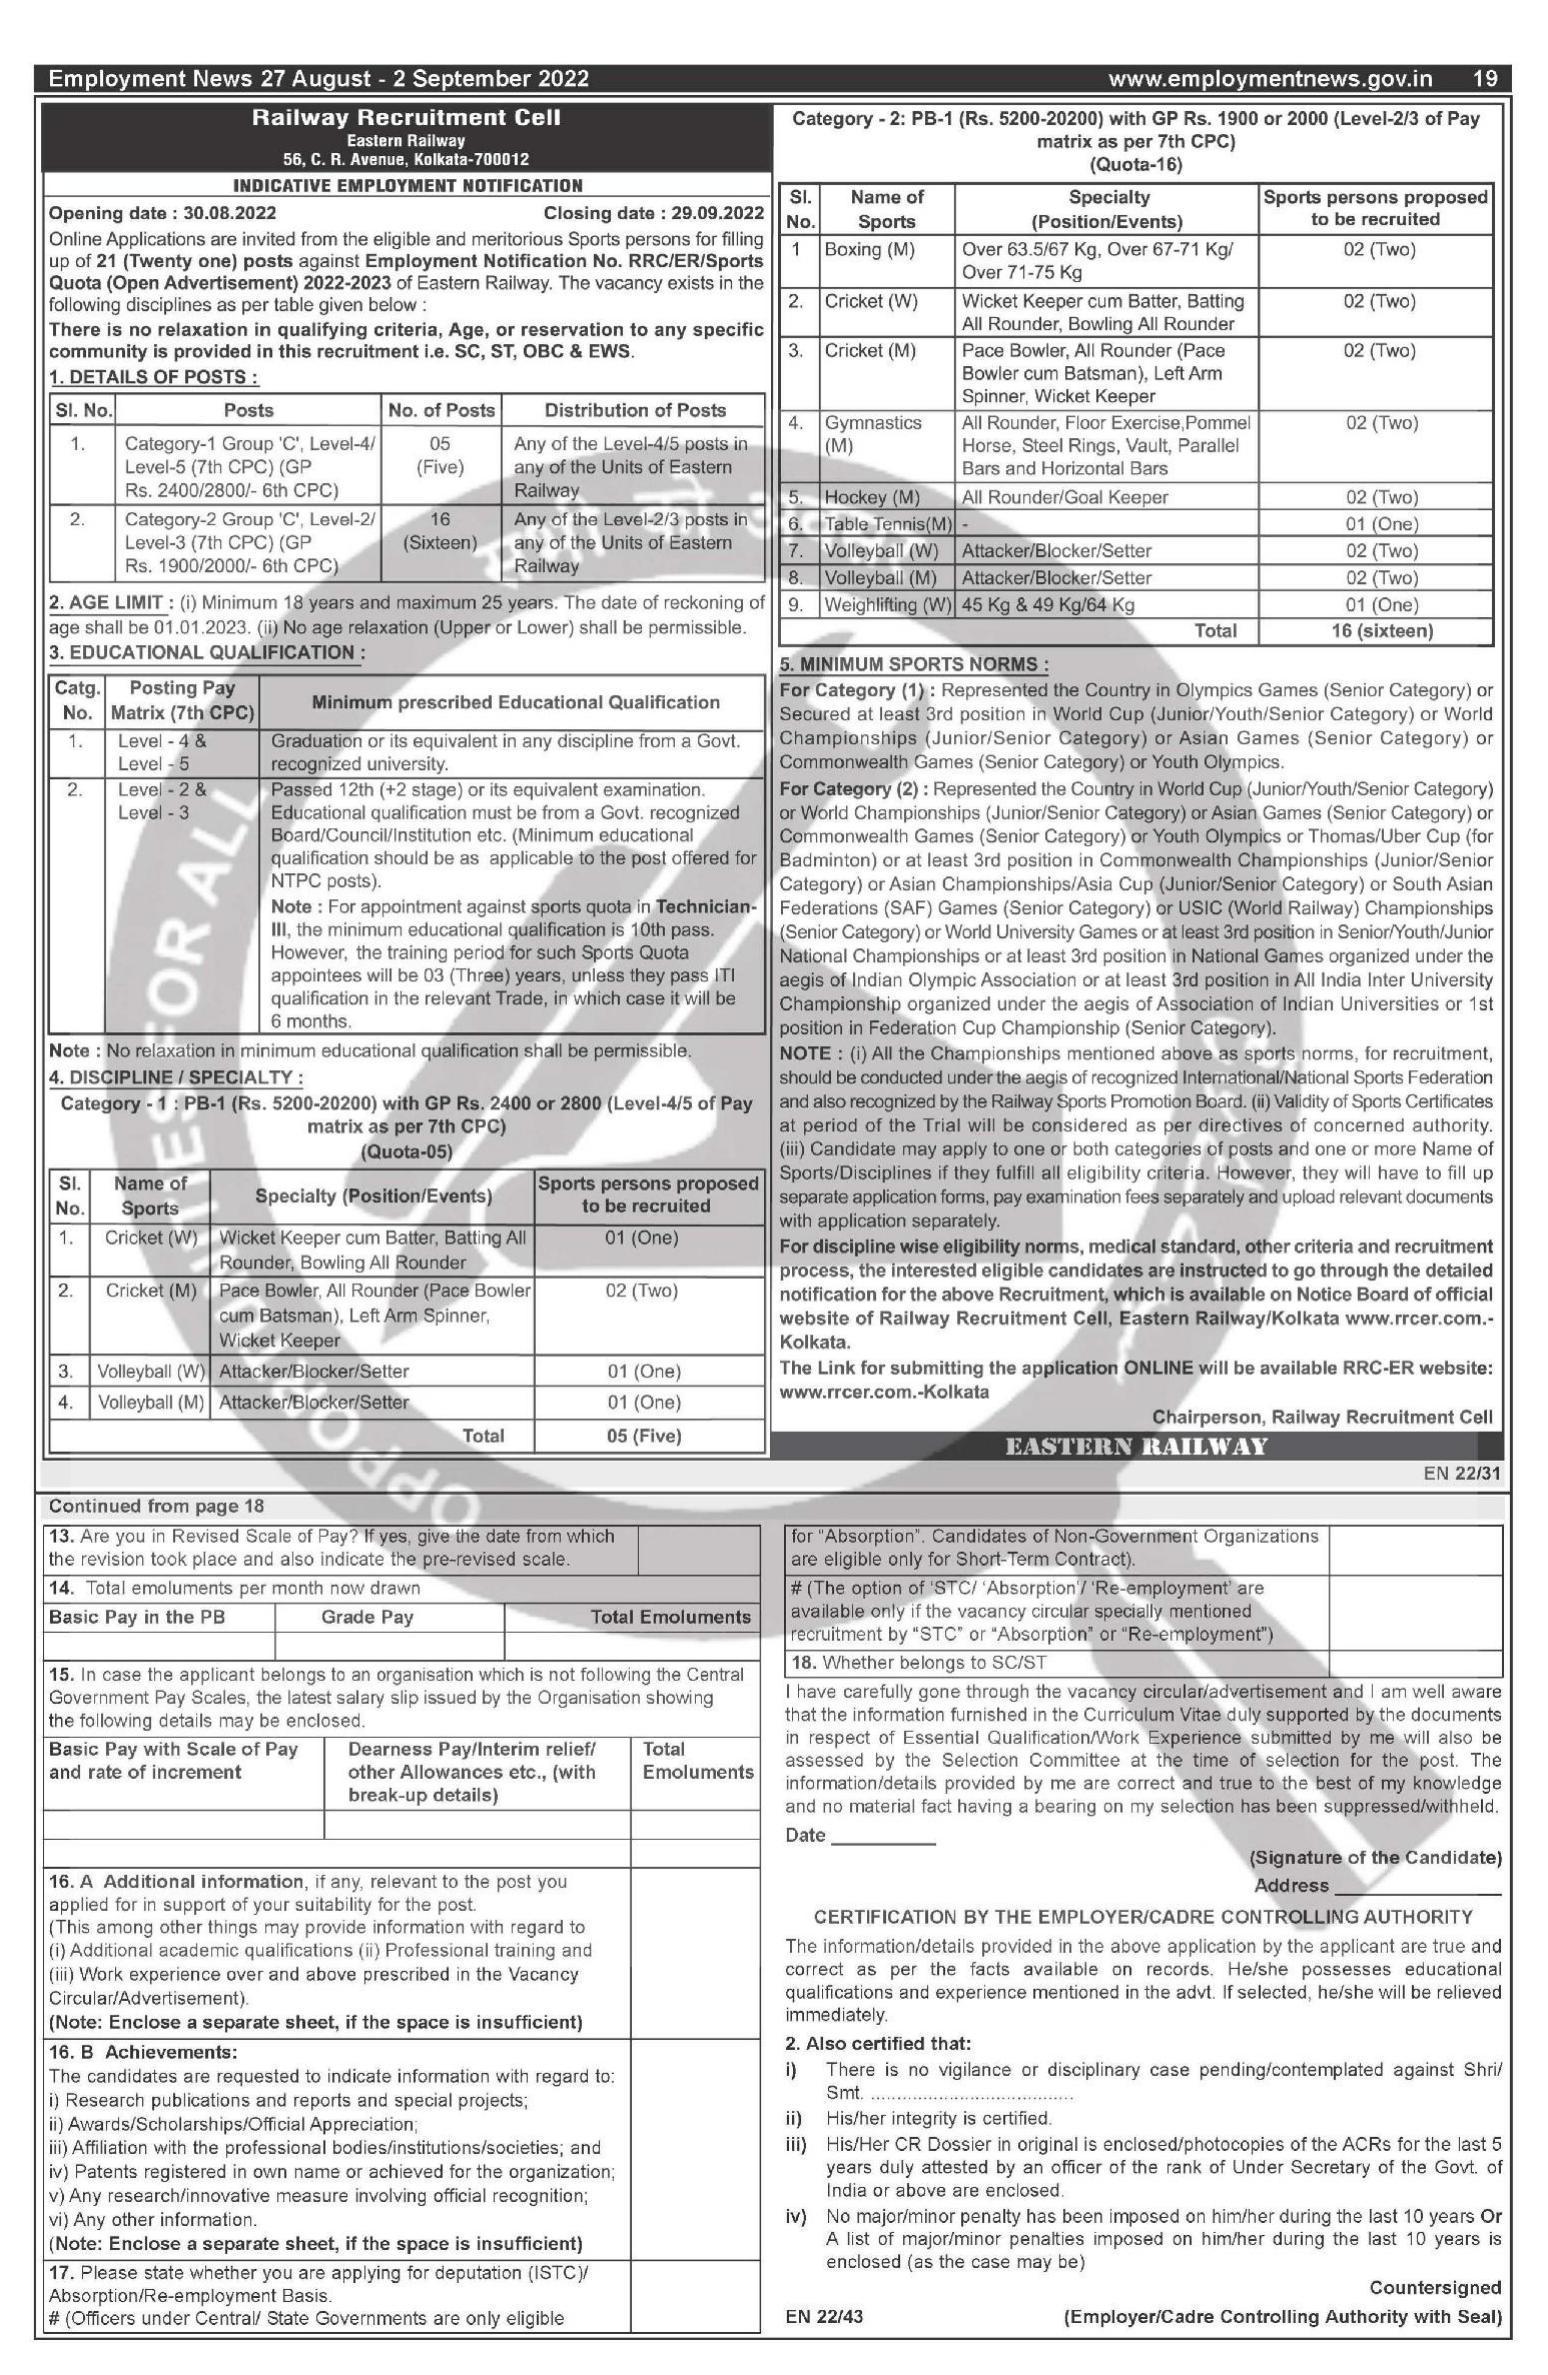 Eastern Railway (ER) Recruitment 2022 For 21 Sports Persons - Page 1